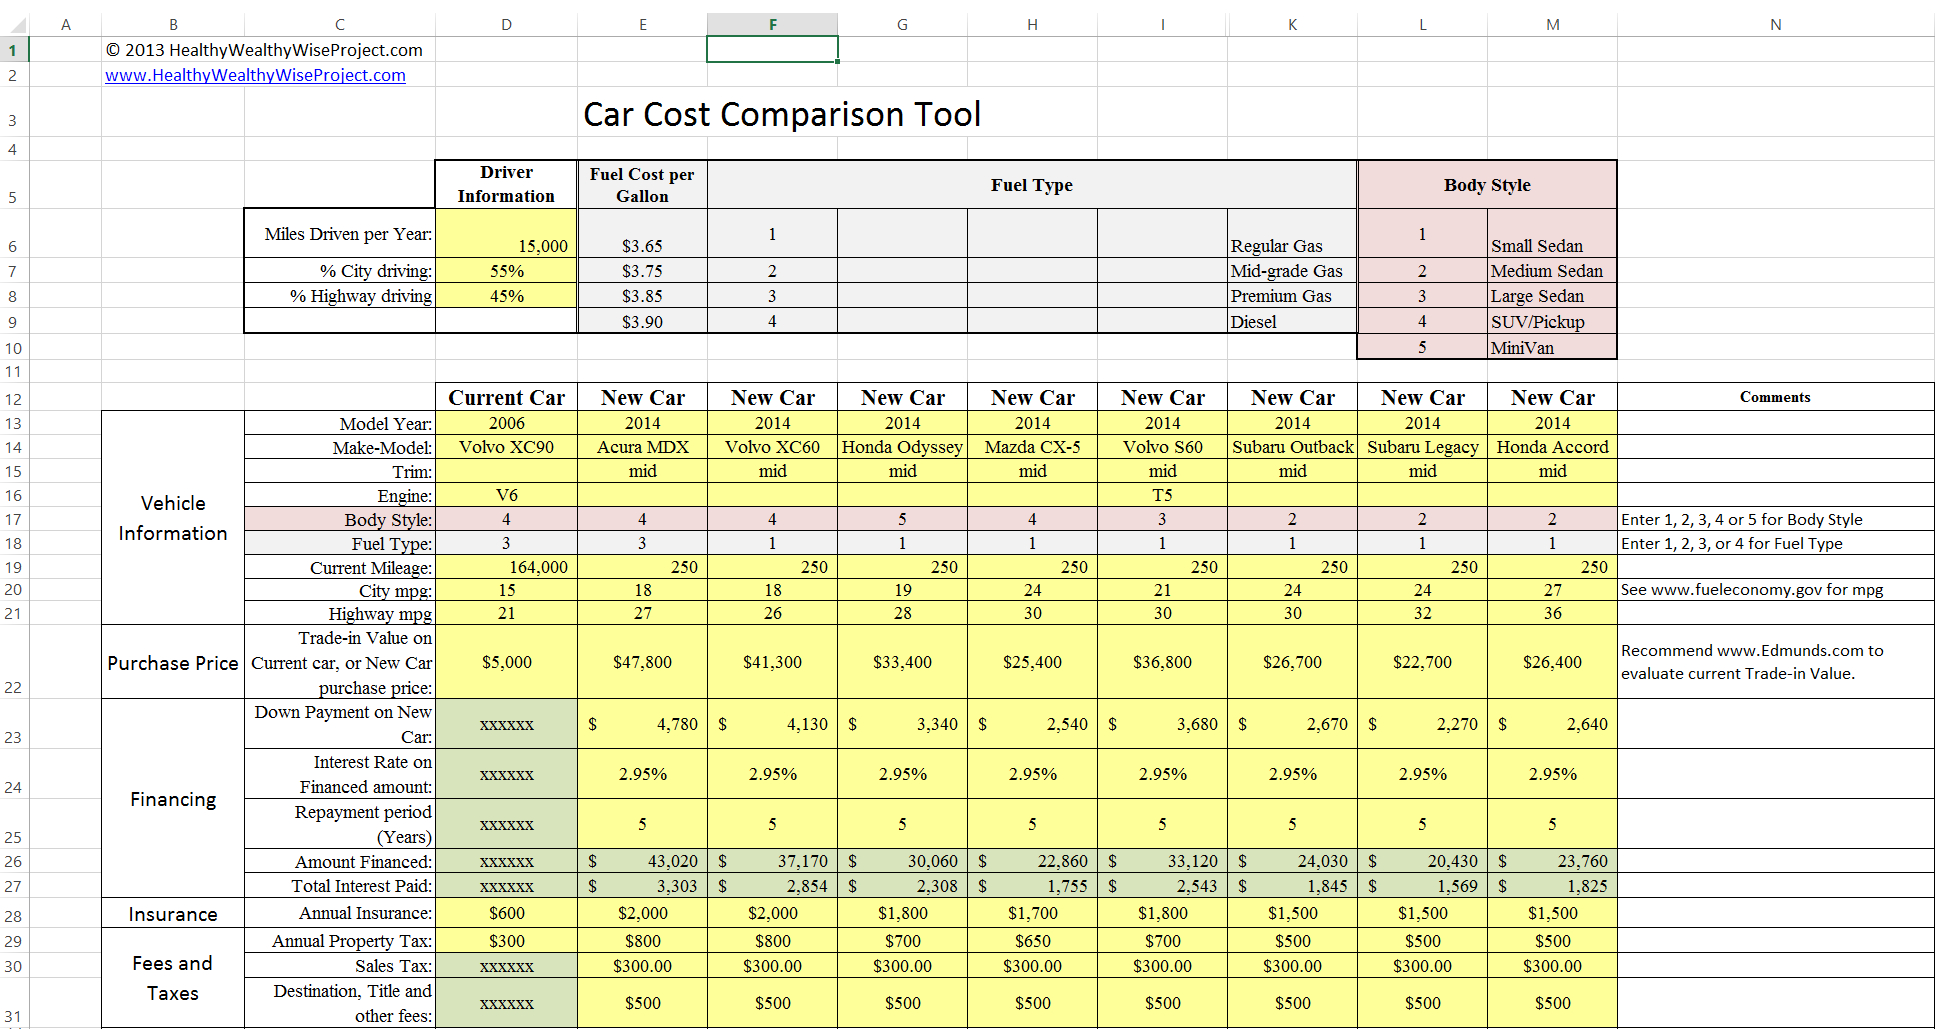 Car Shopping Comparison Spreadsheet Throughout Car Cost Comparison Tool For Excel